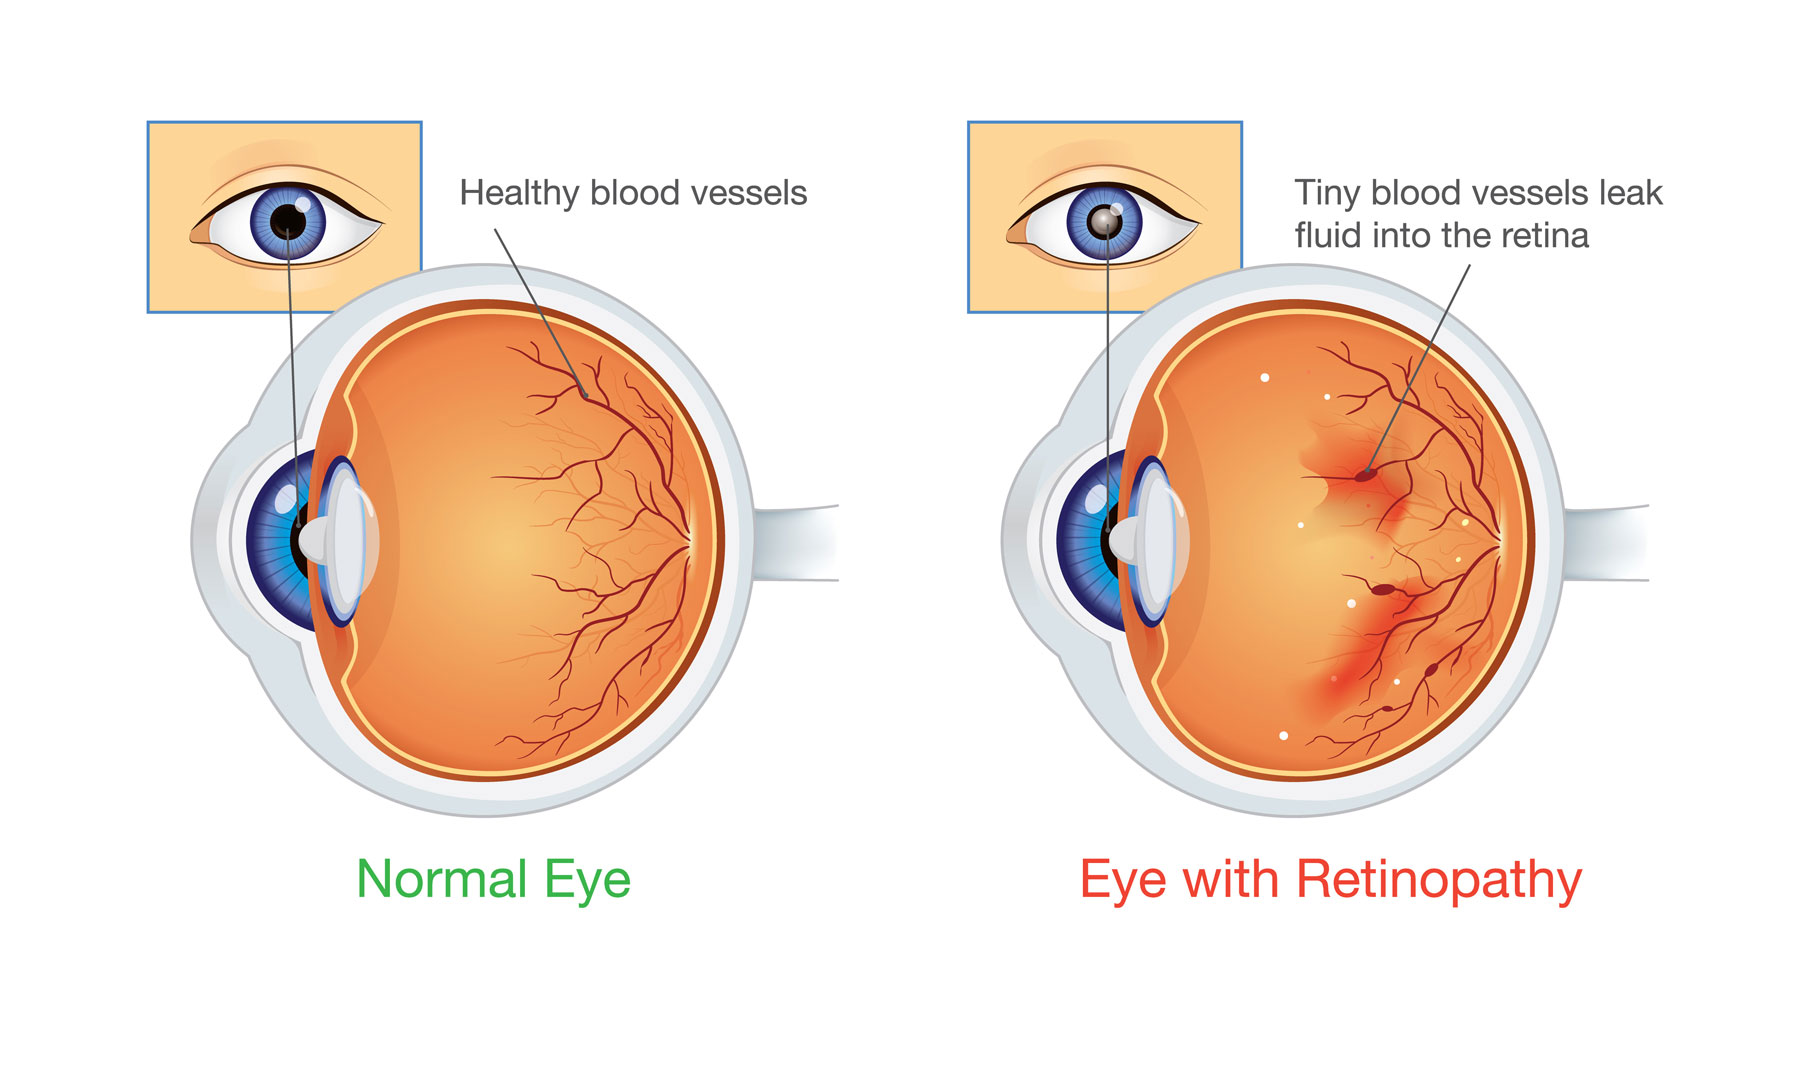 Simplified drawing of two eyeballs from the side, one with retinopathy and the other without. The normal eye is listed as having “healthy blood vessels.” The eye with retinopathy is listed as having “tiny blood vessels that leak fluid into the retina.”